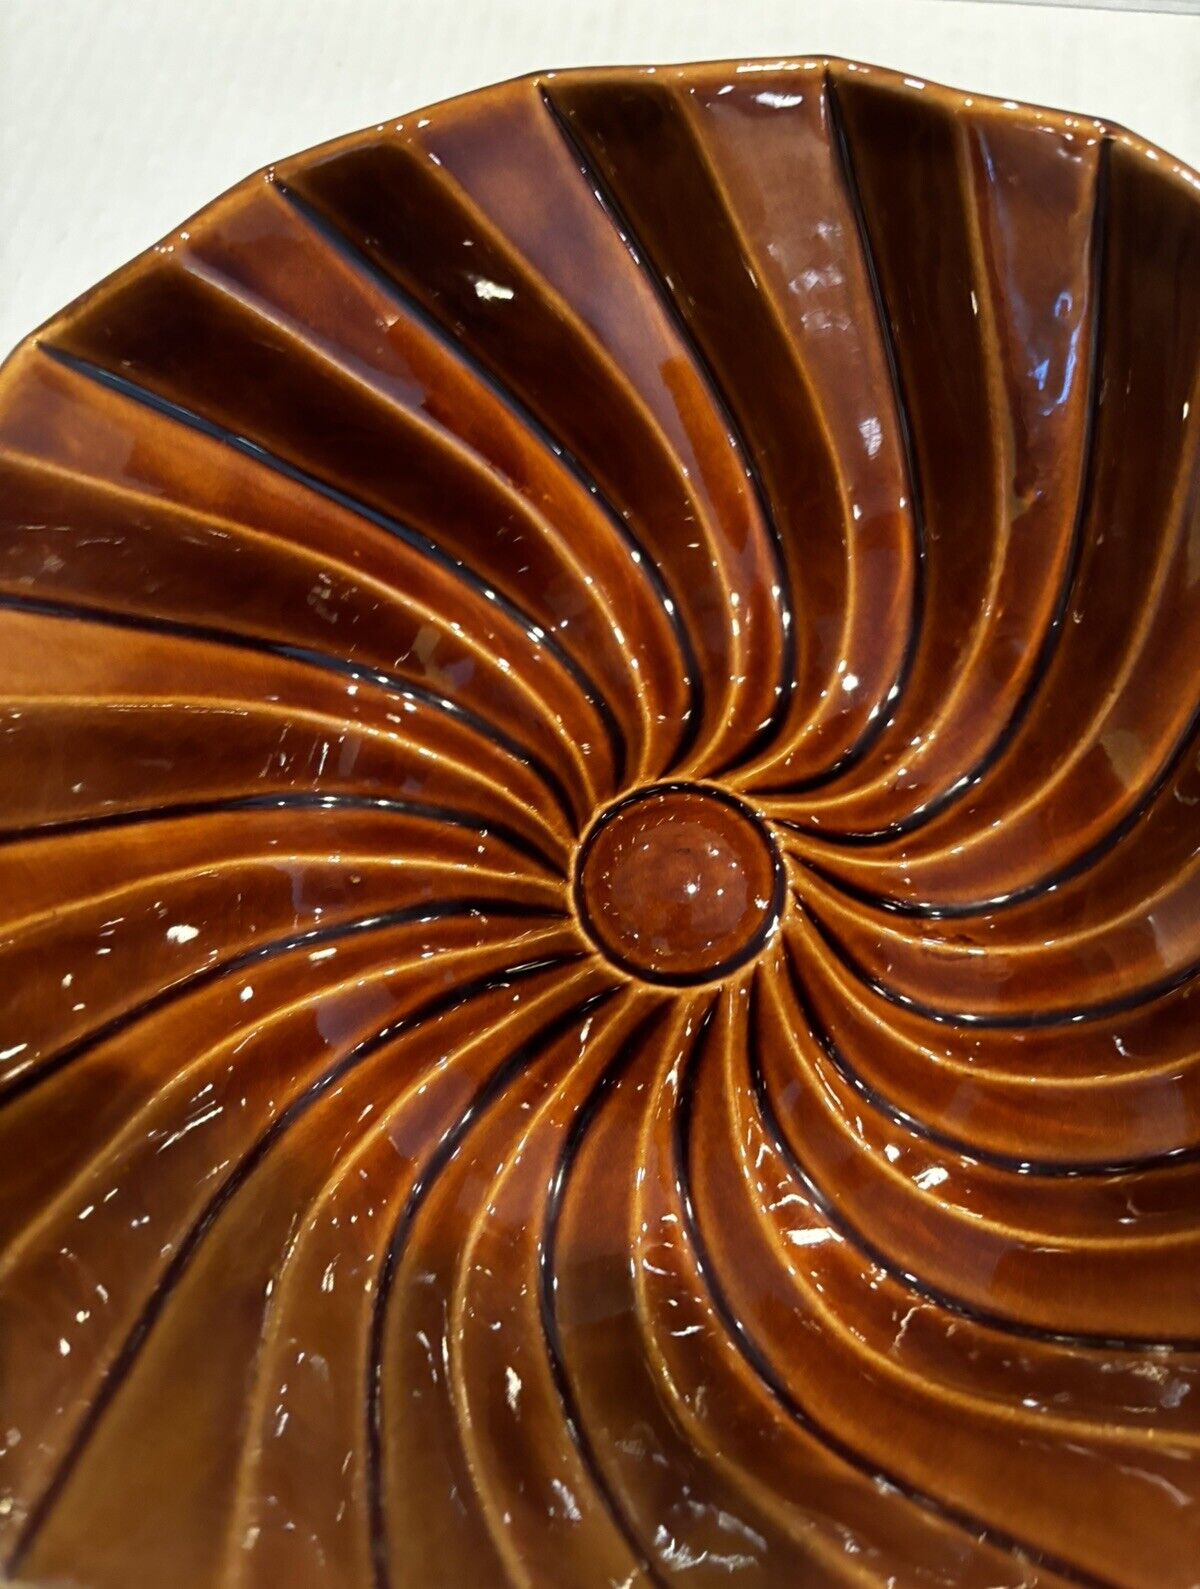 Vintage Stunning Spiral Swirling Decorative Serving Bowl By USA-B5 One Flaw